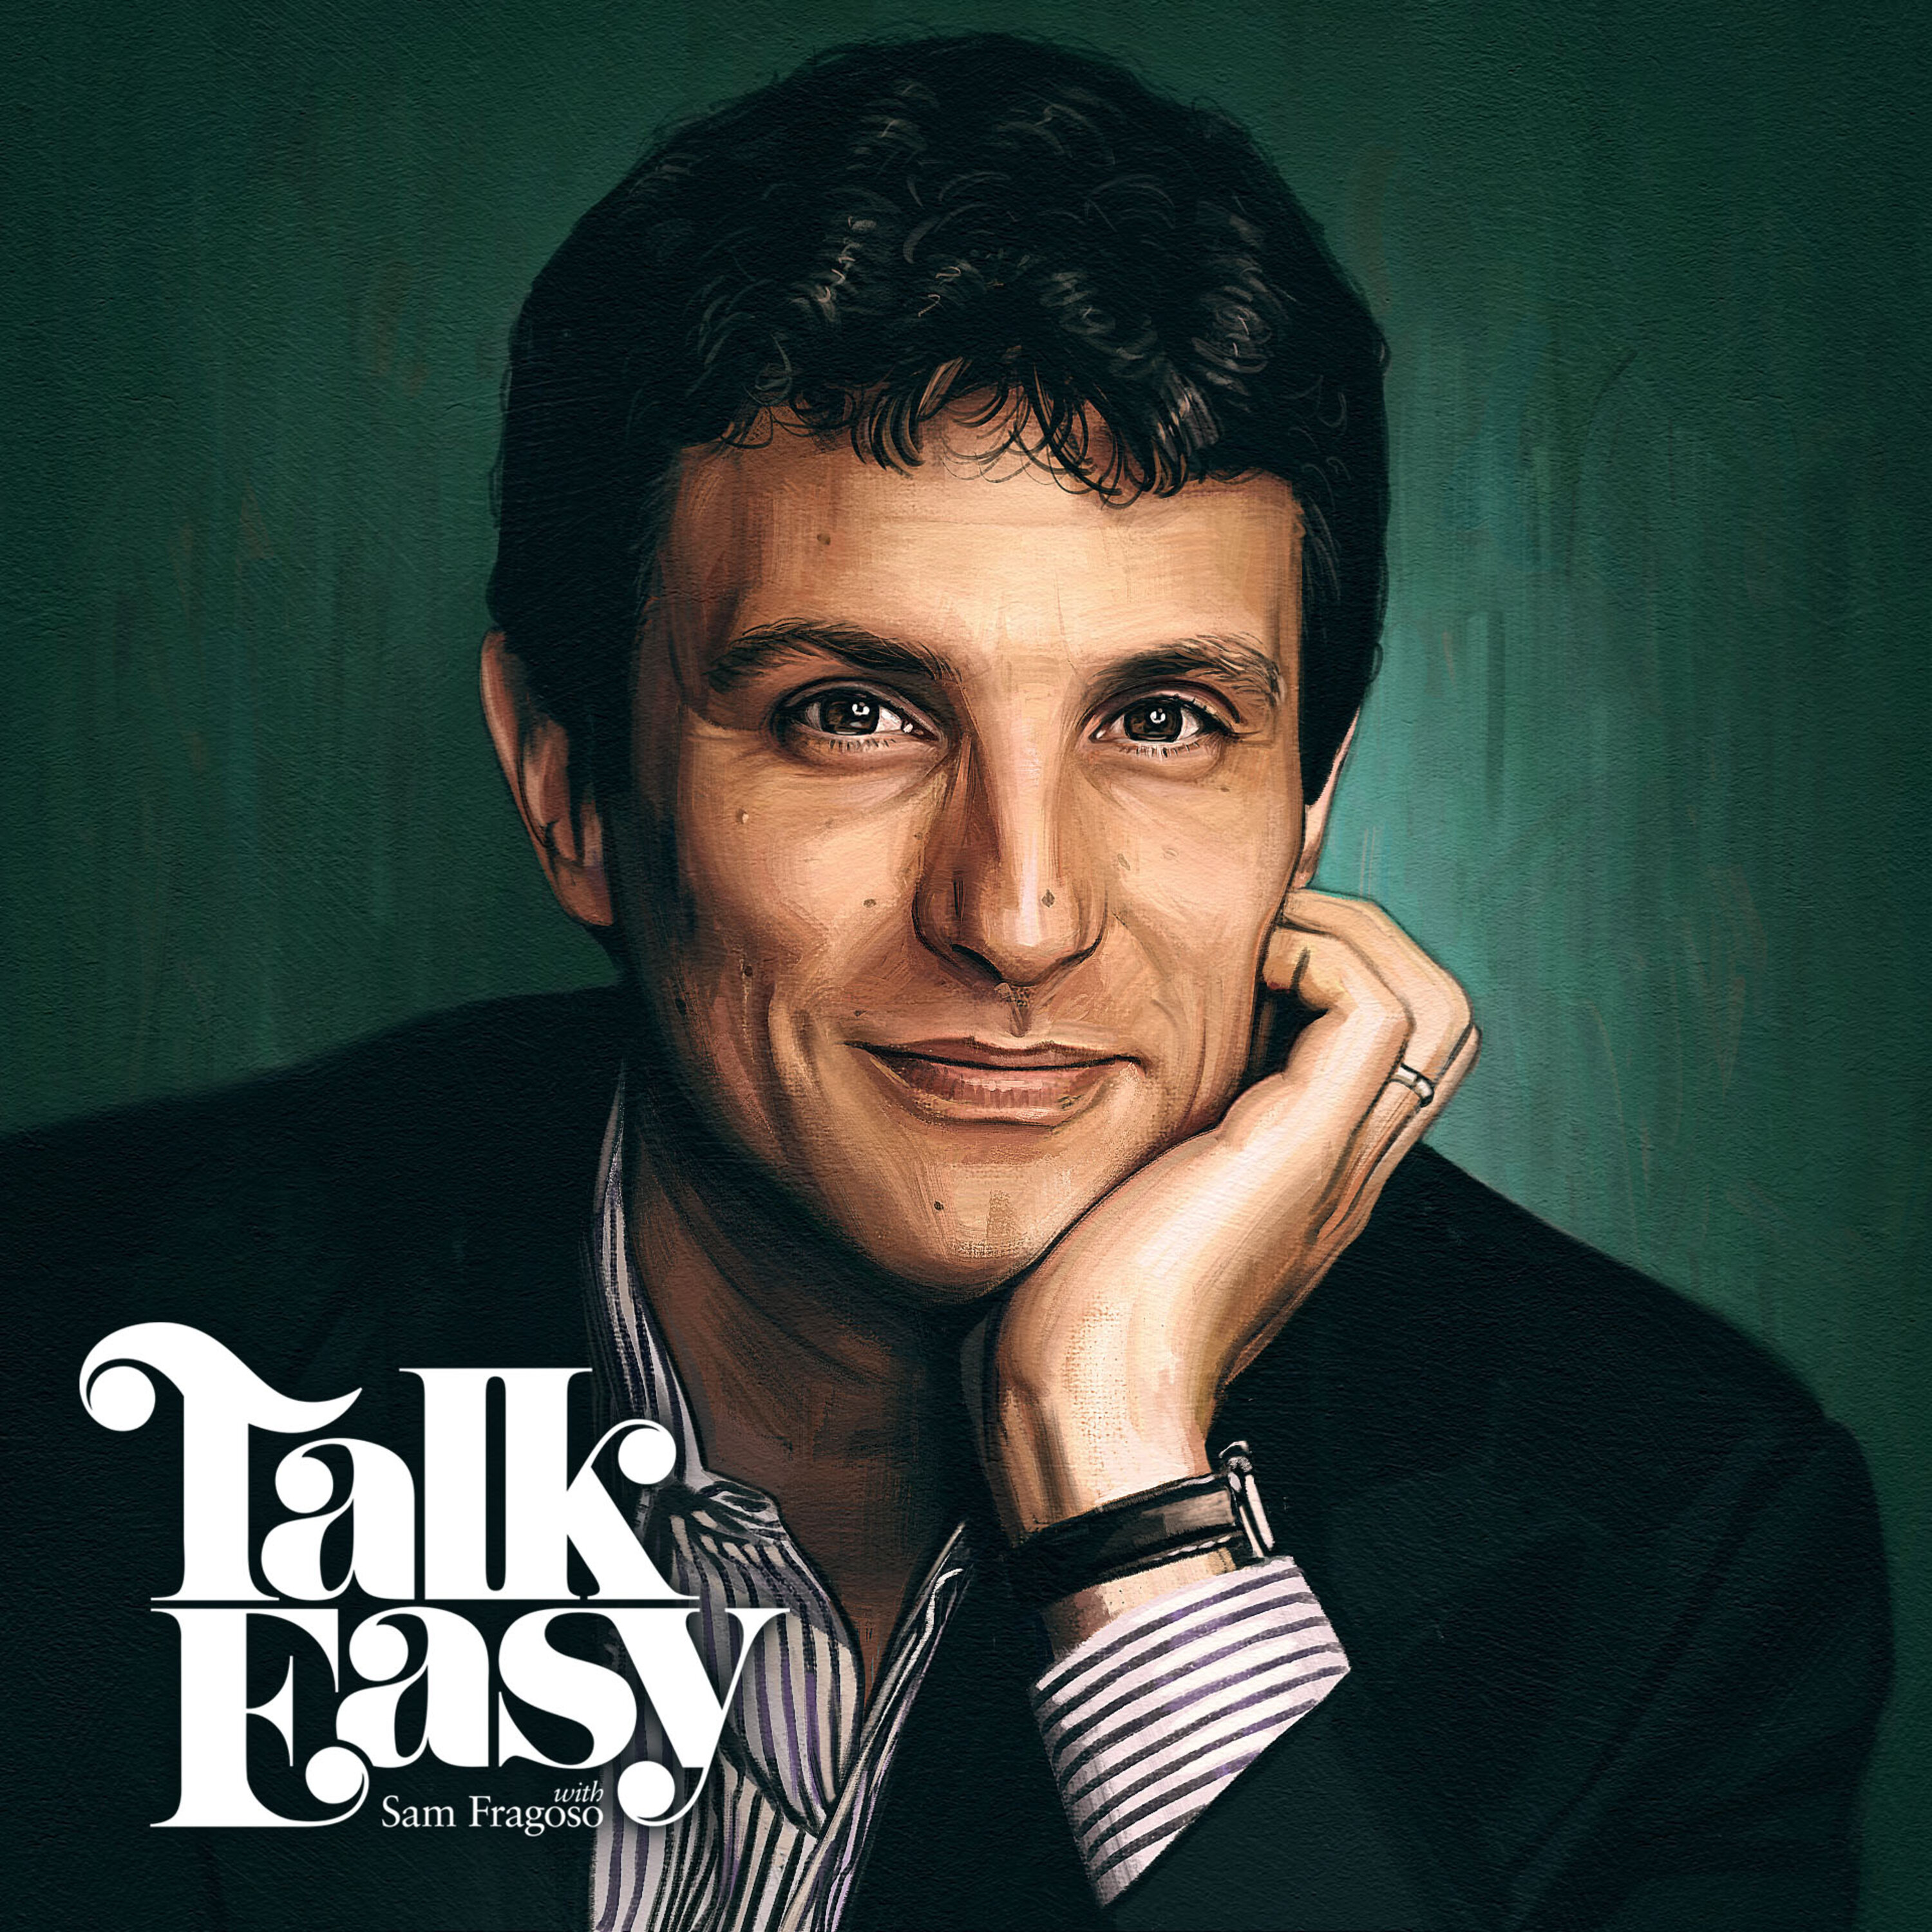 The New Yorker Editor David Remnick: 'There's No Time to Despair'